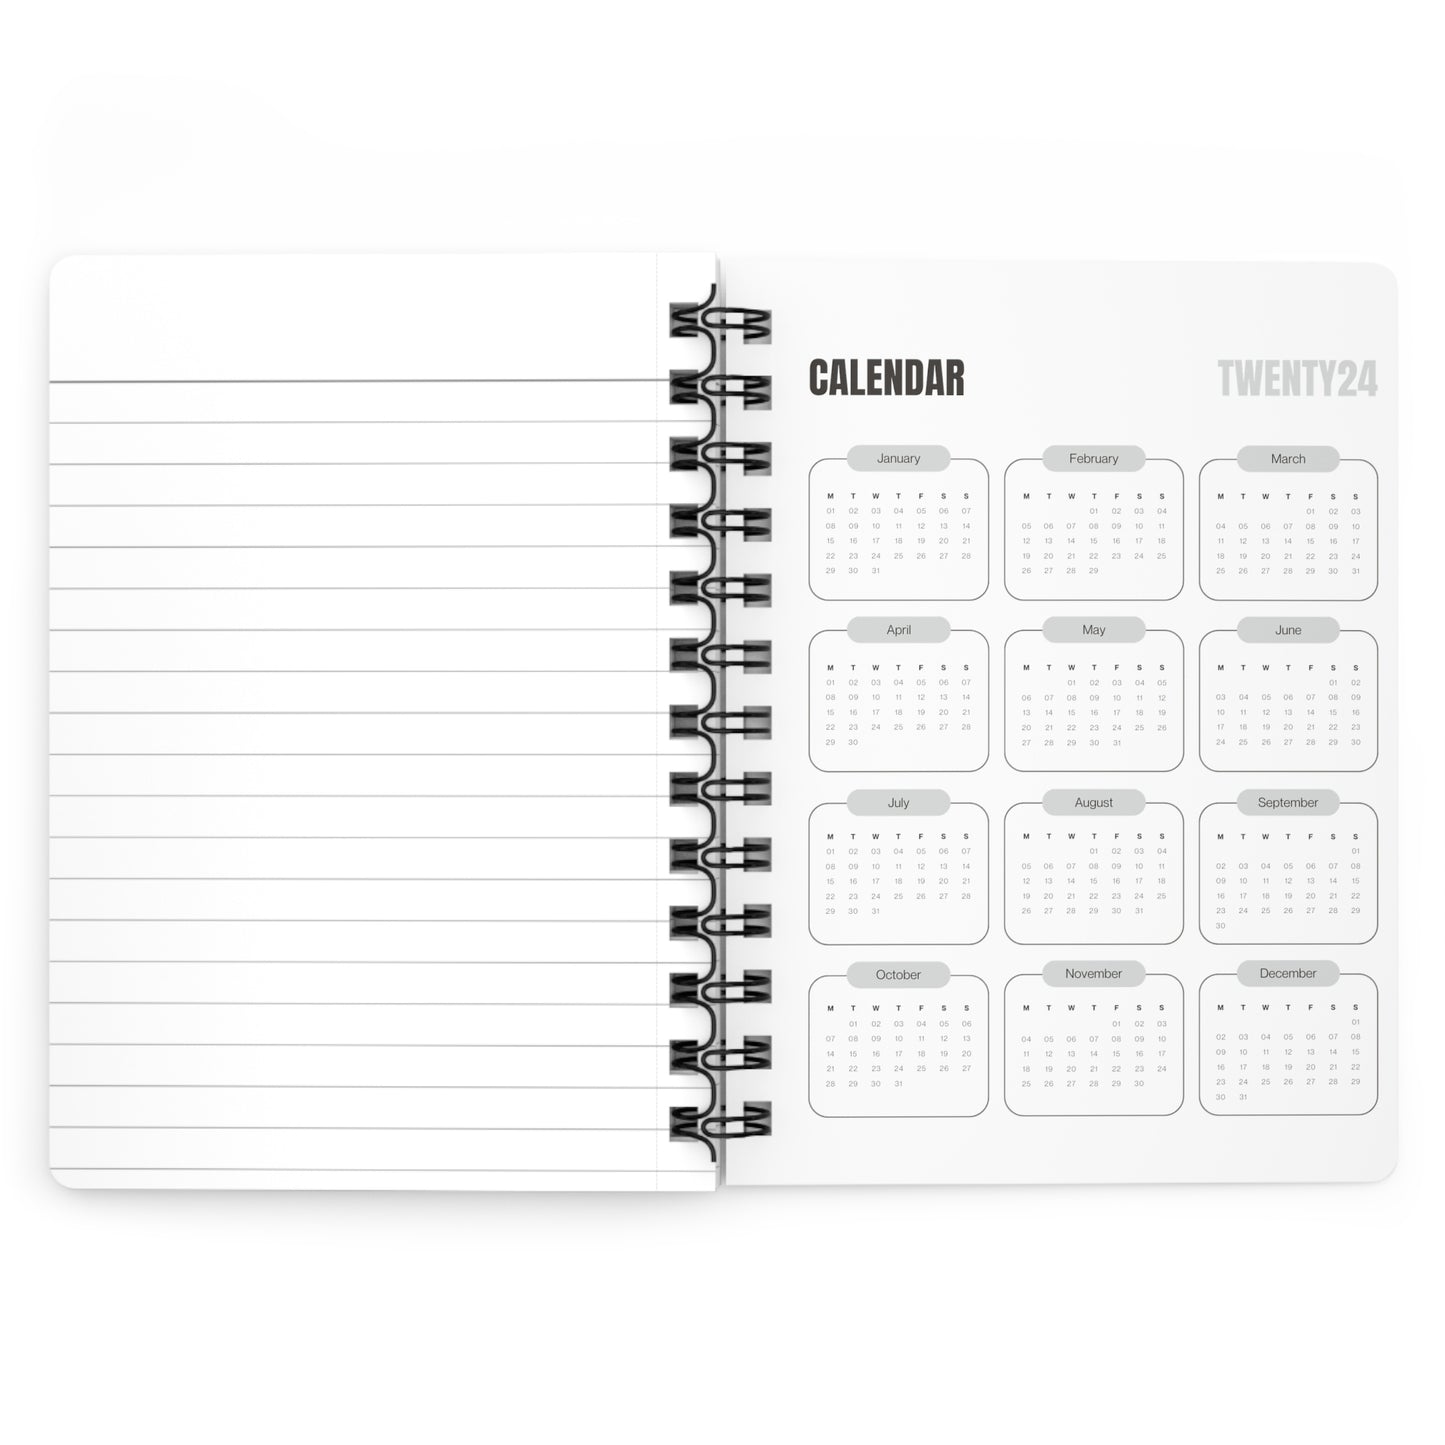 Flossy Nia Spiral Bound Notebooks and Journals with 2023-2024 Year-at-a-Glance Calendar